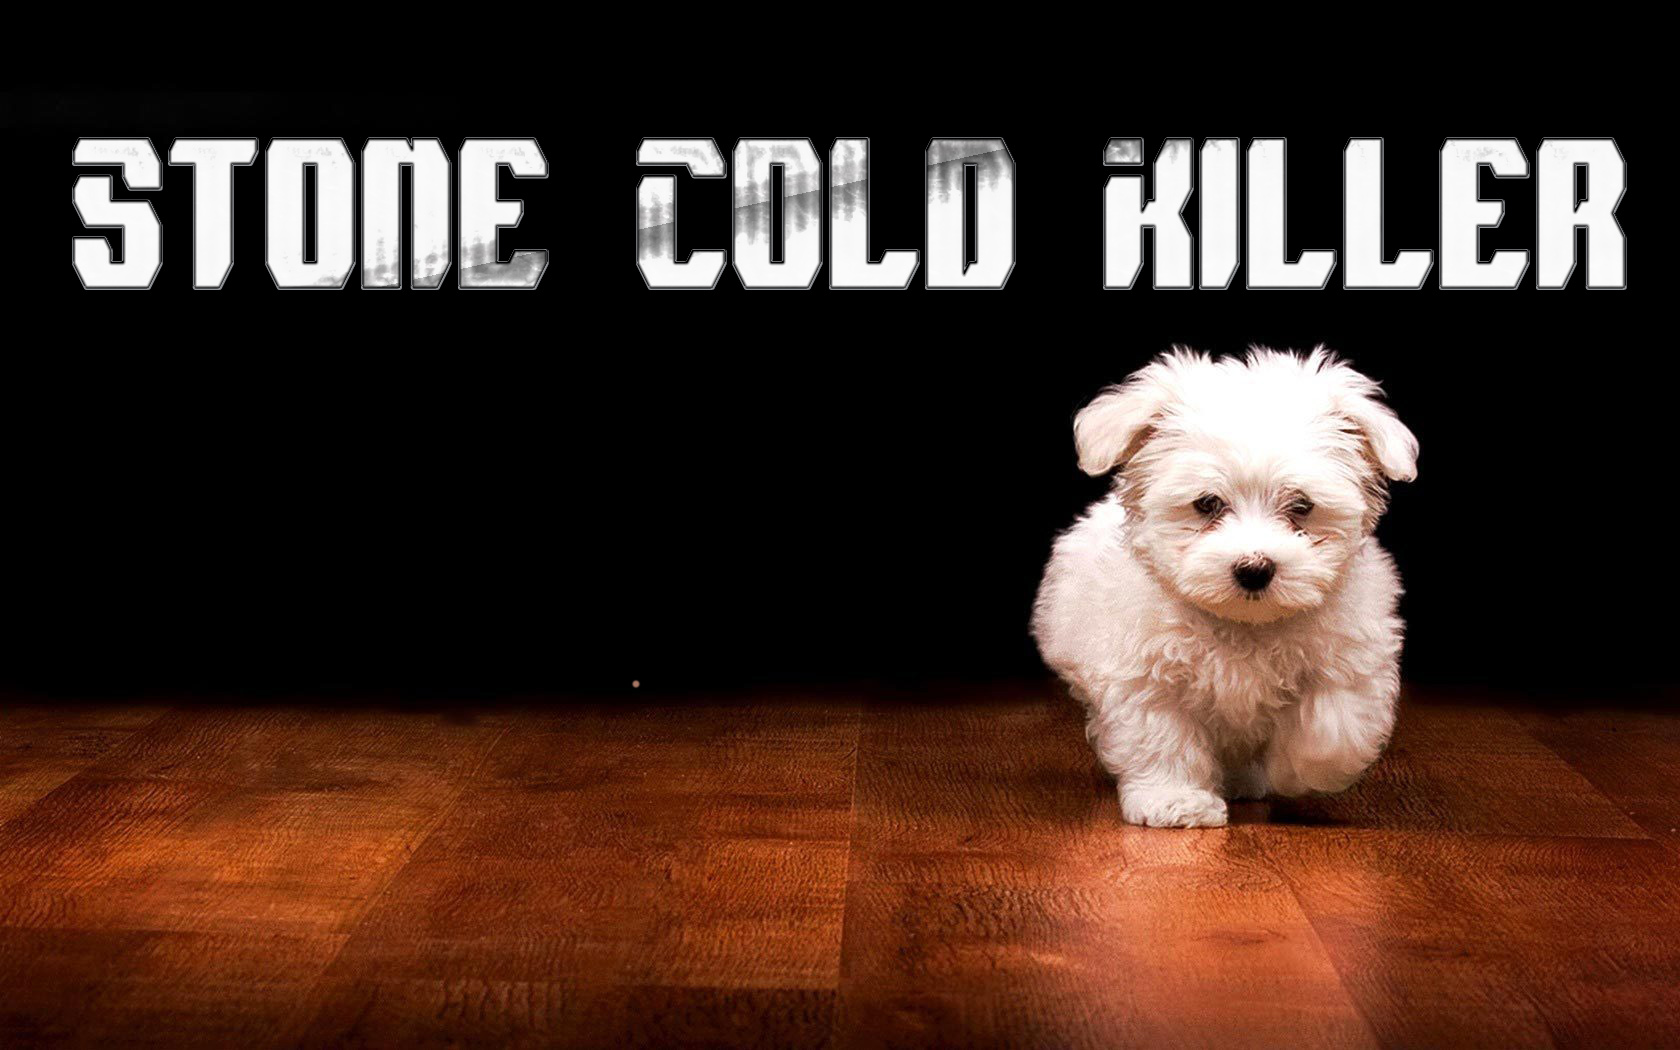 Dog Killer Humor Funny Puppy Puppies Cute Sadic Dogs - Cute Animal Meme Backgrounds , HD Wallpaper & Backgrounds